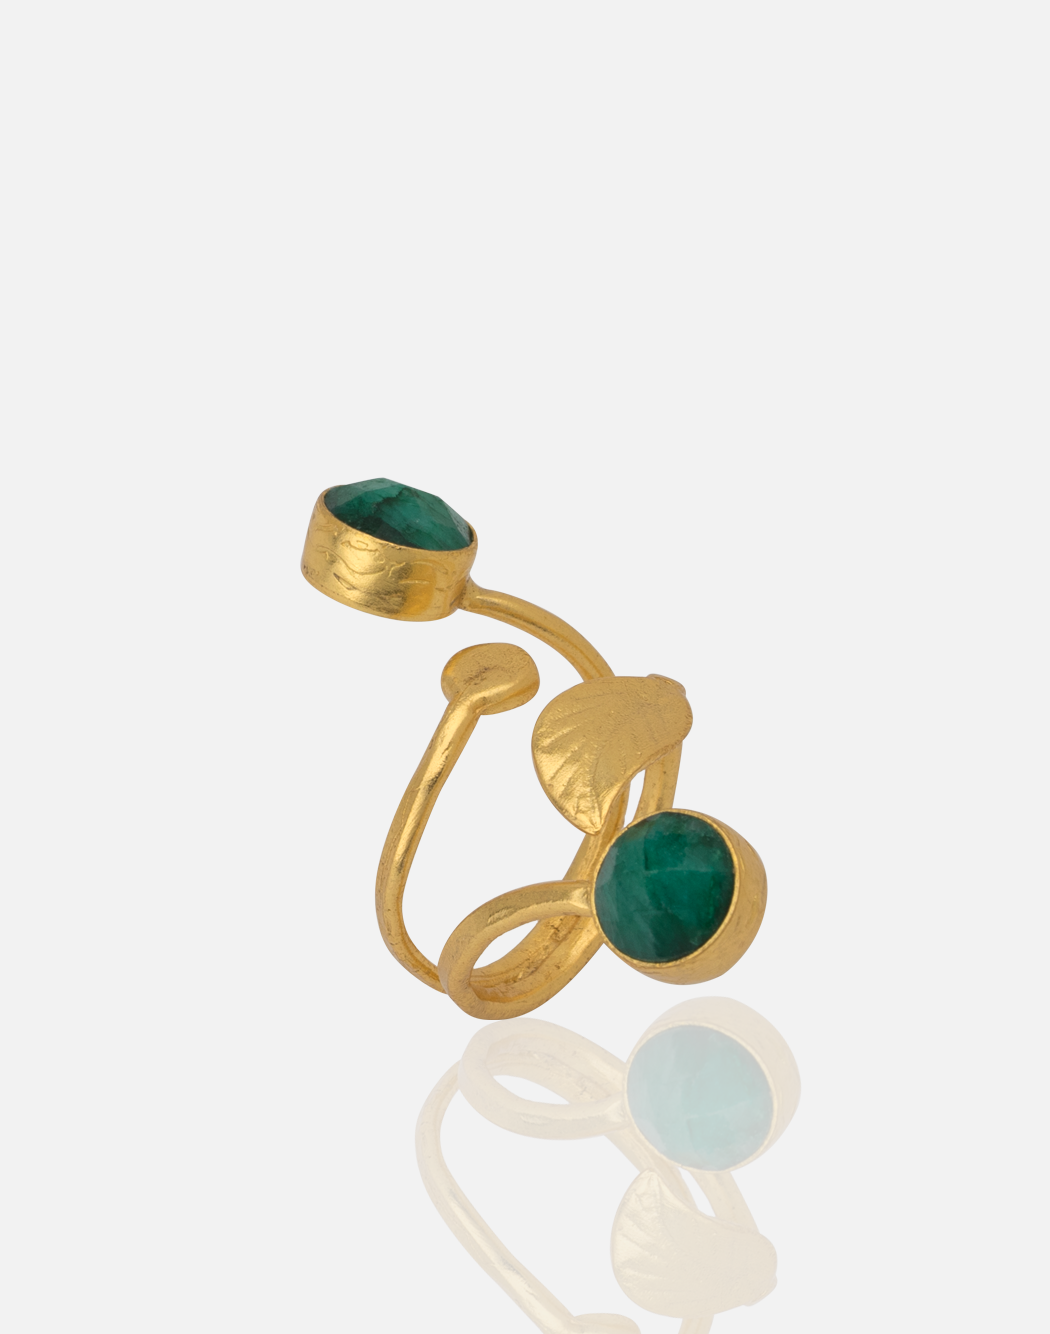 Gold Ring with two Emerald Stones adjustable for women handmade at RM kandy